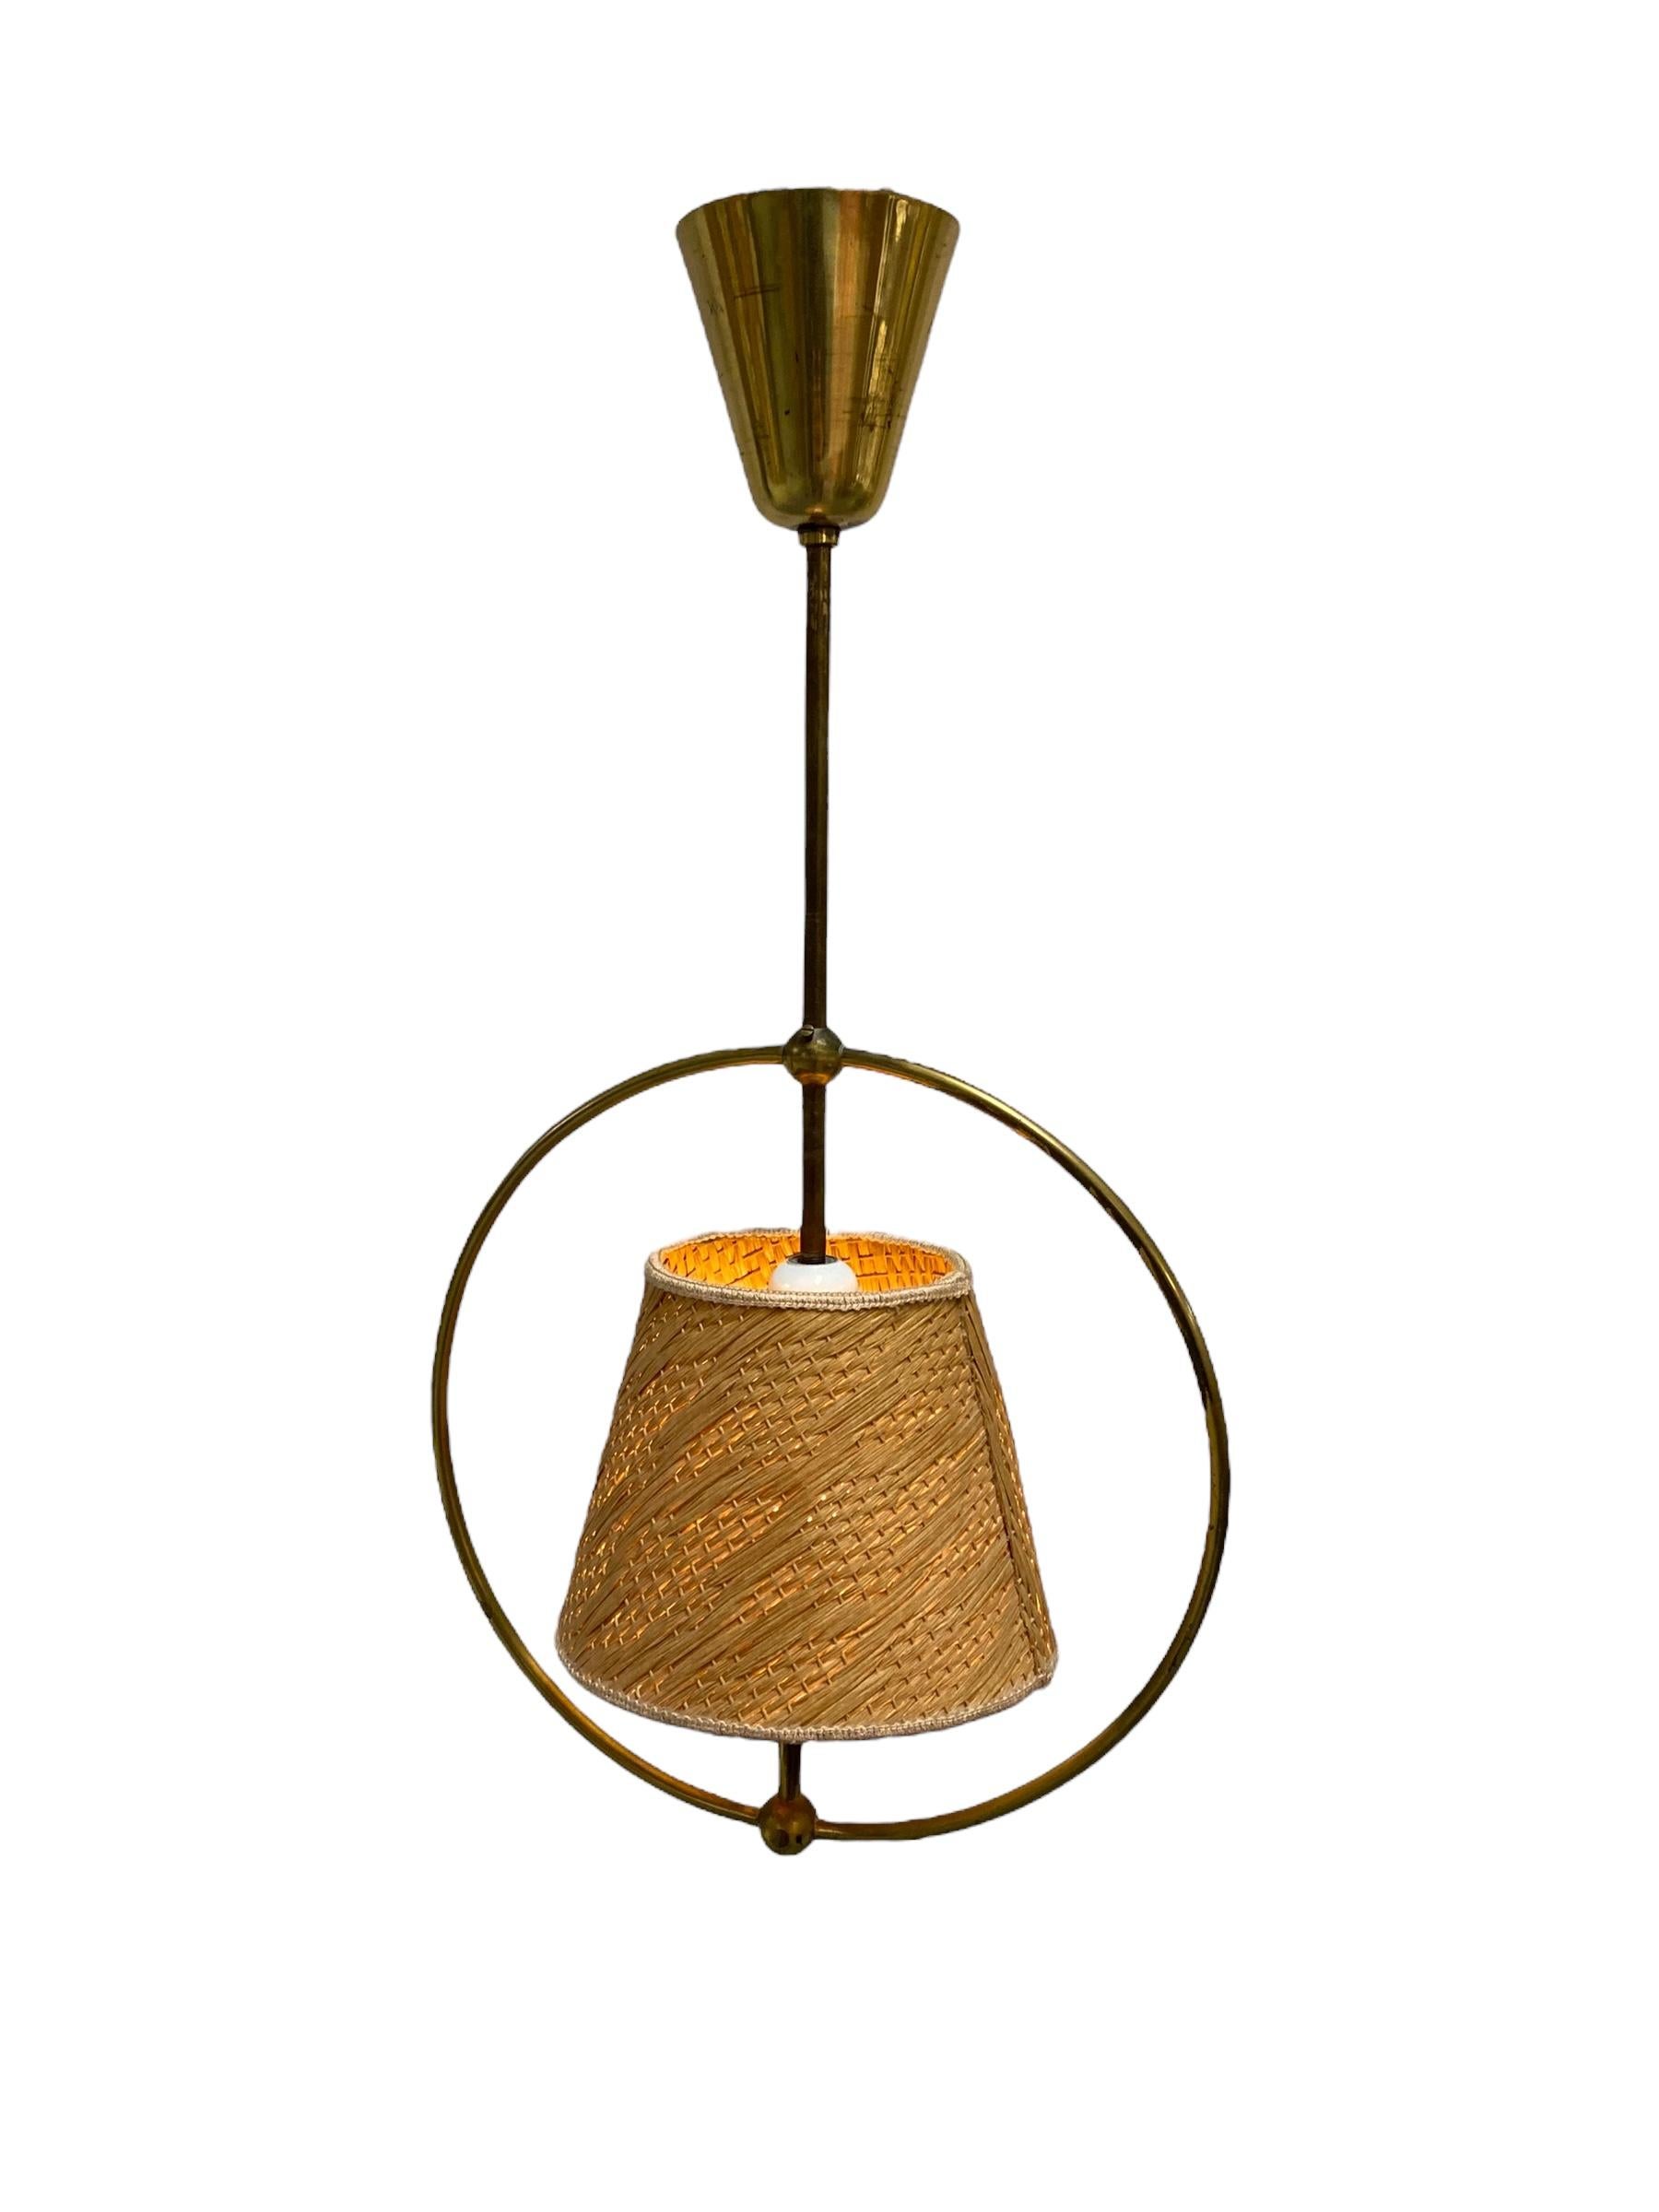 Finnish Maria Lindeman Ceiling Lamp Model. 50591, 1950s For Sale